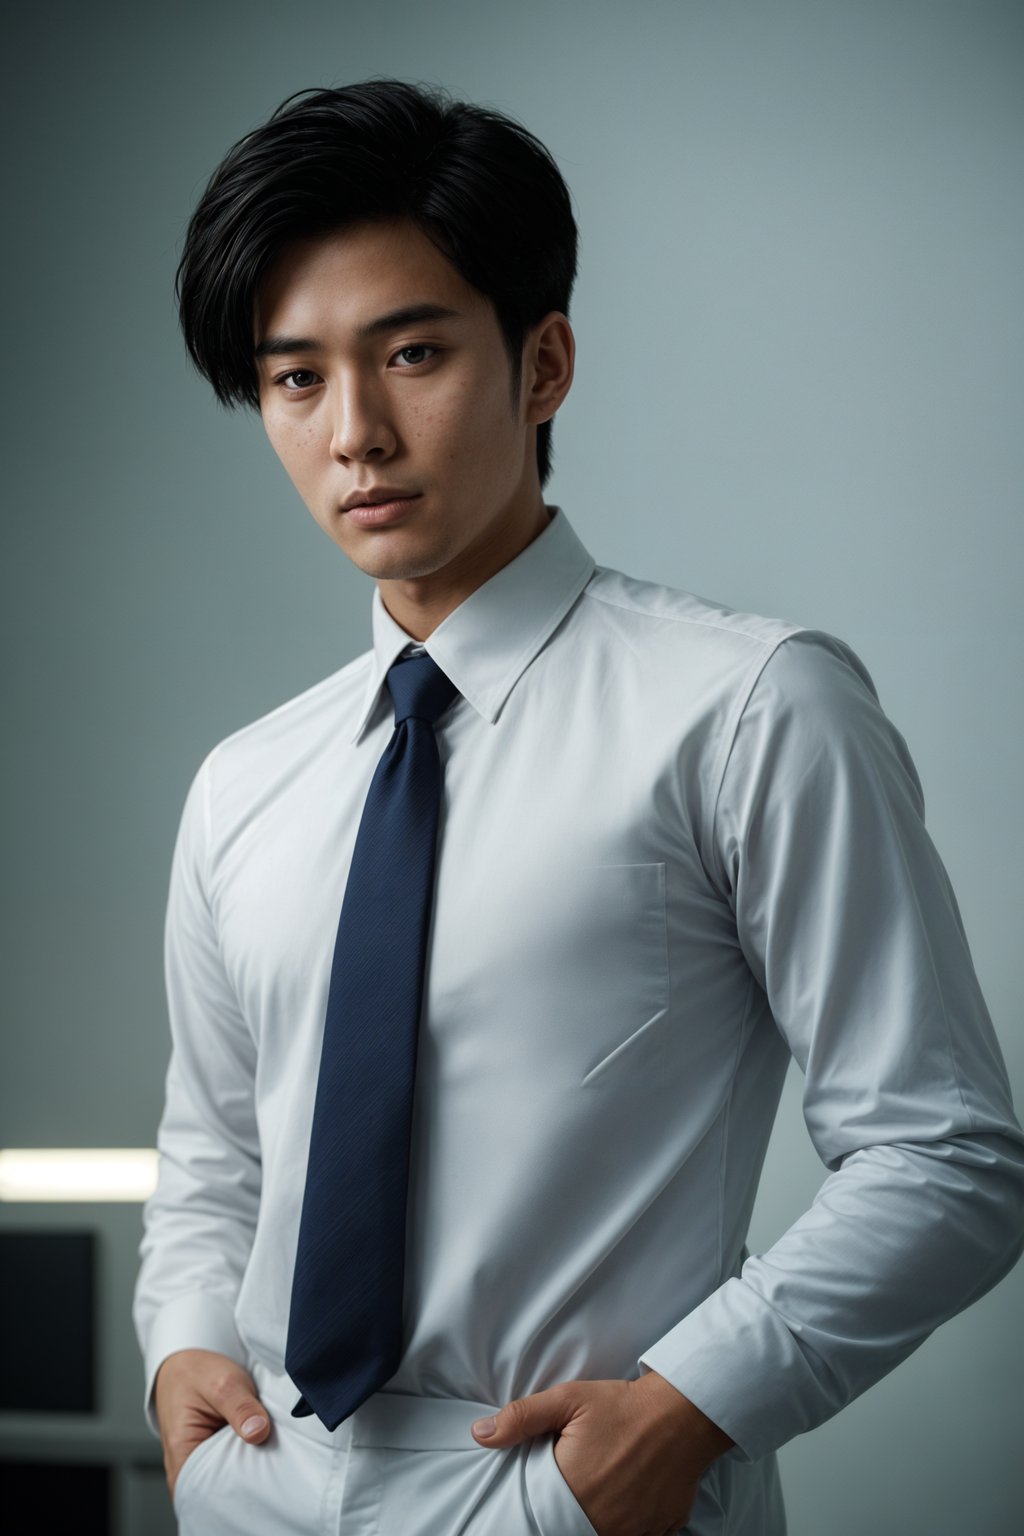 handsome and stylish man wearing a classic navy blue suit with a crisp white dress shirt and a patterned tie